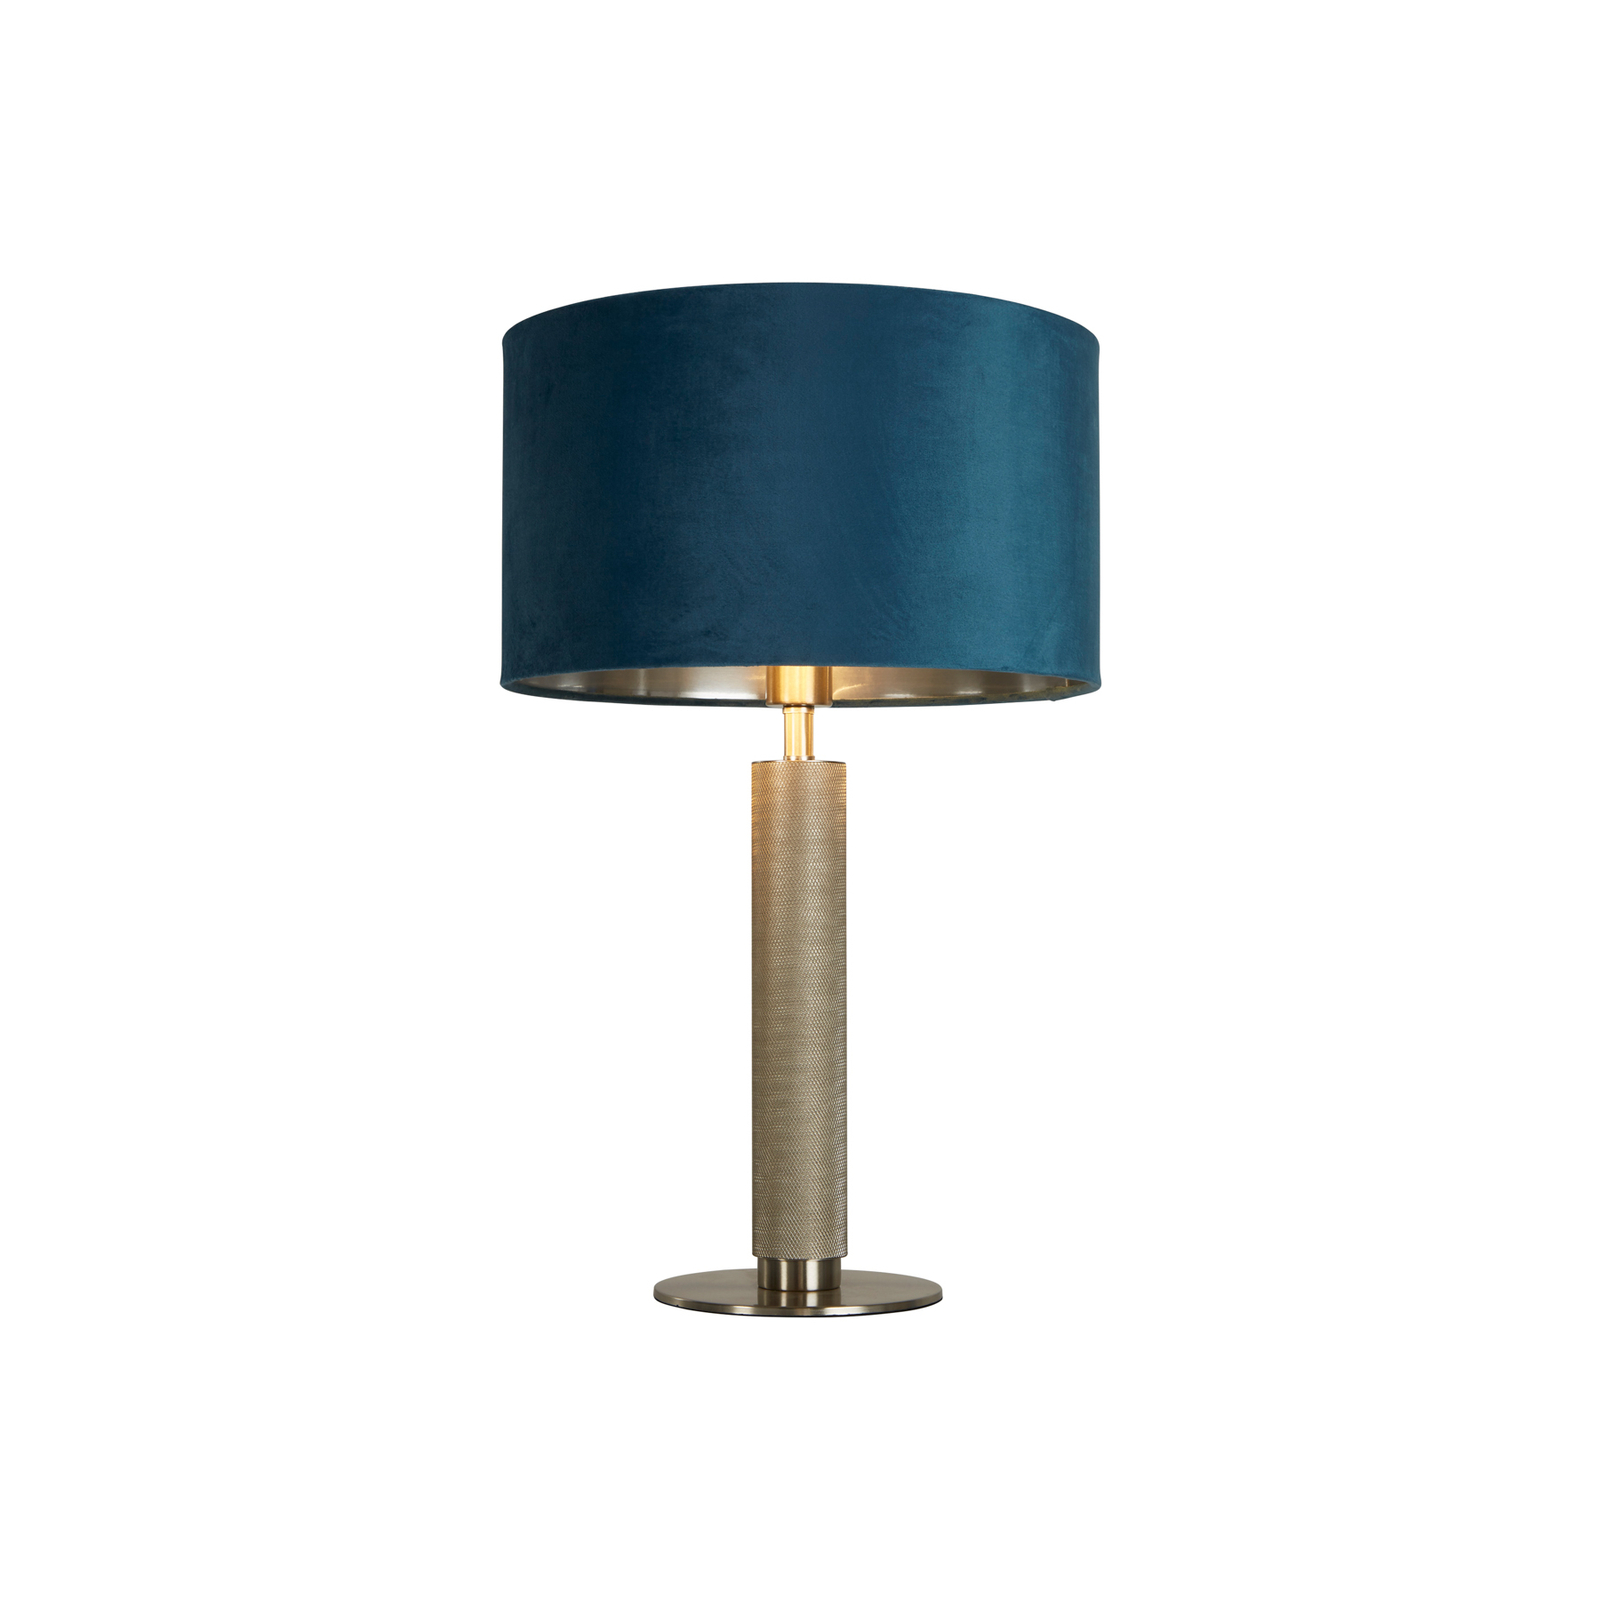 London table lamp, silver / turquoise